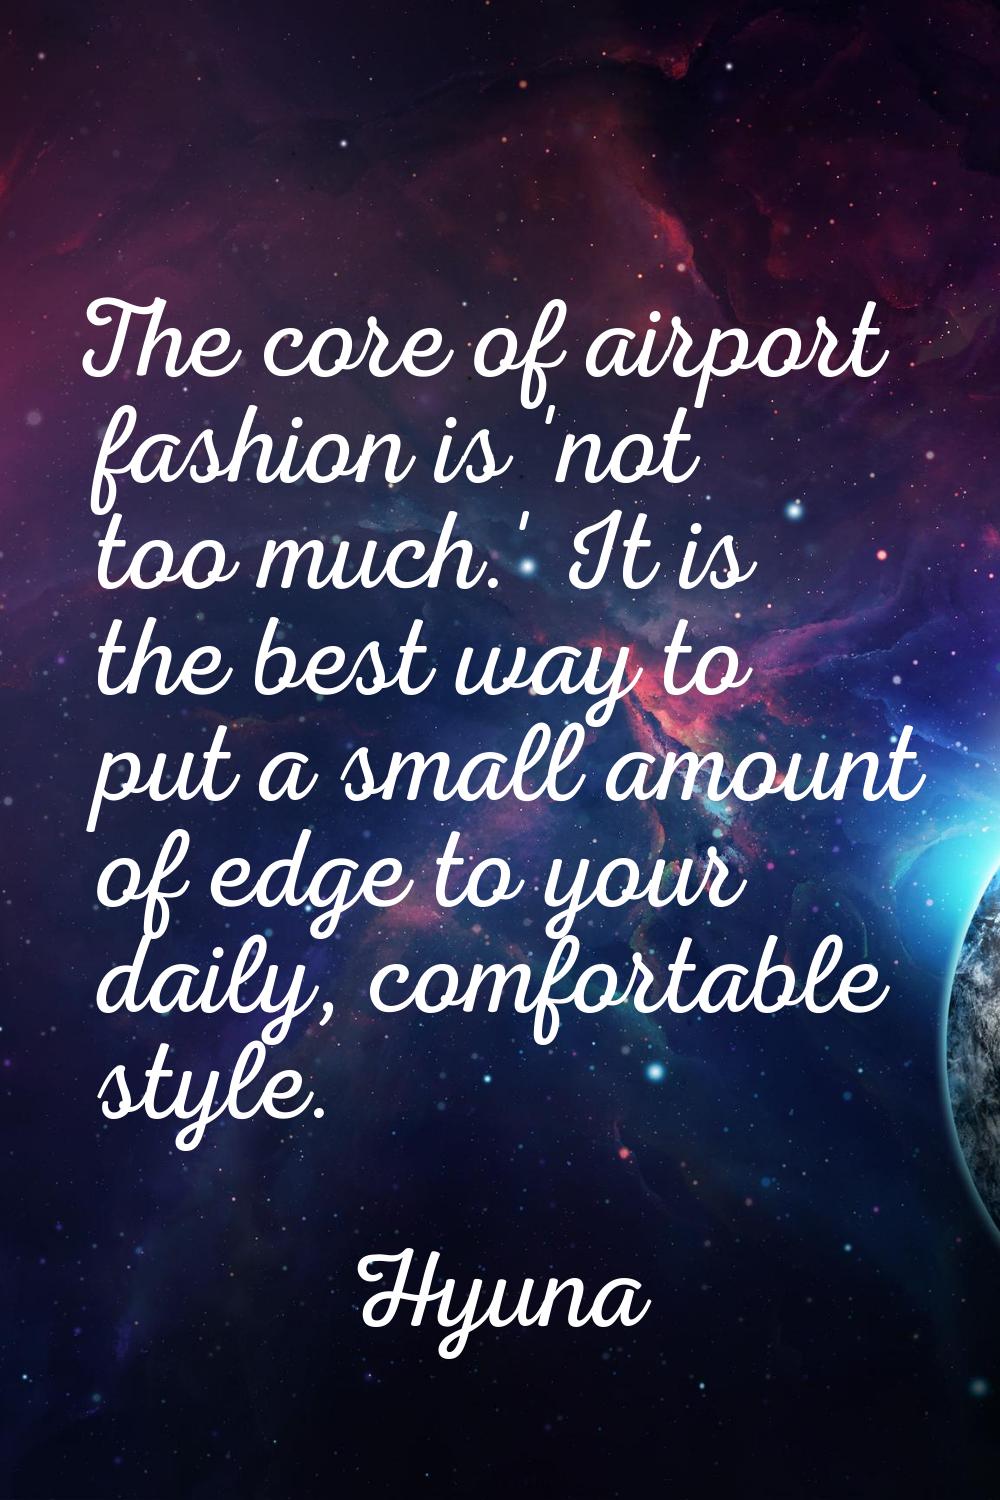 The core of airport fashion is 'not too much.' It is the best way to put a small amount of edge to 